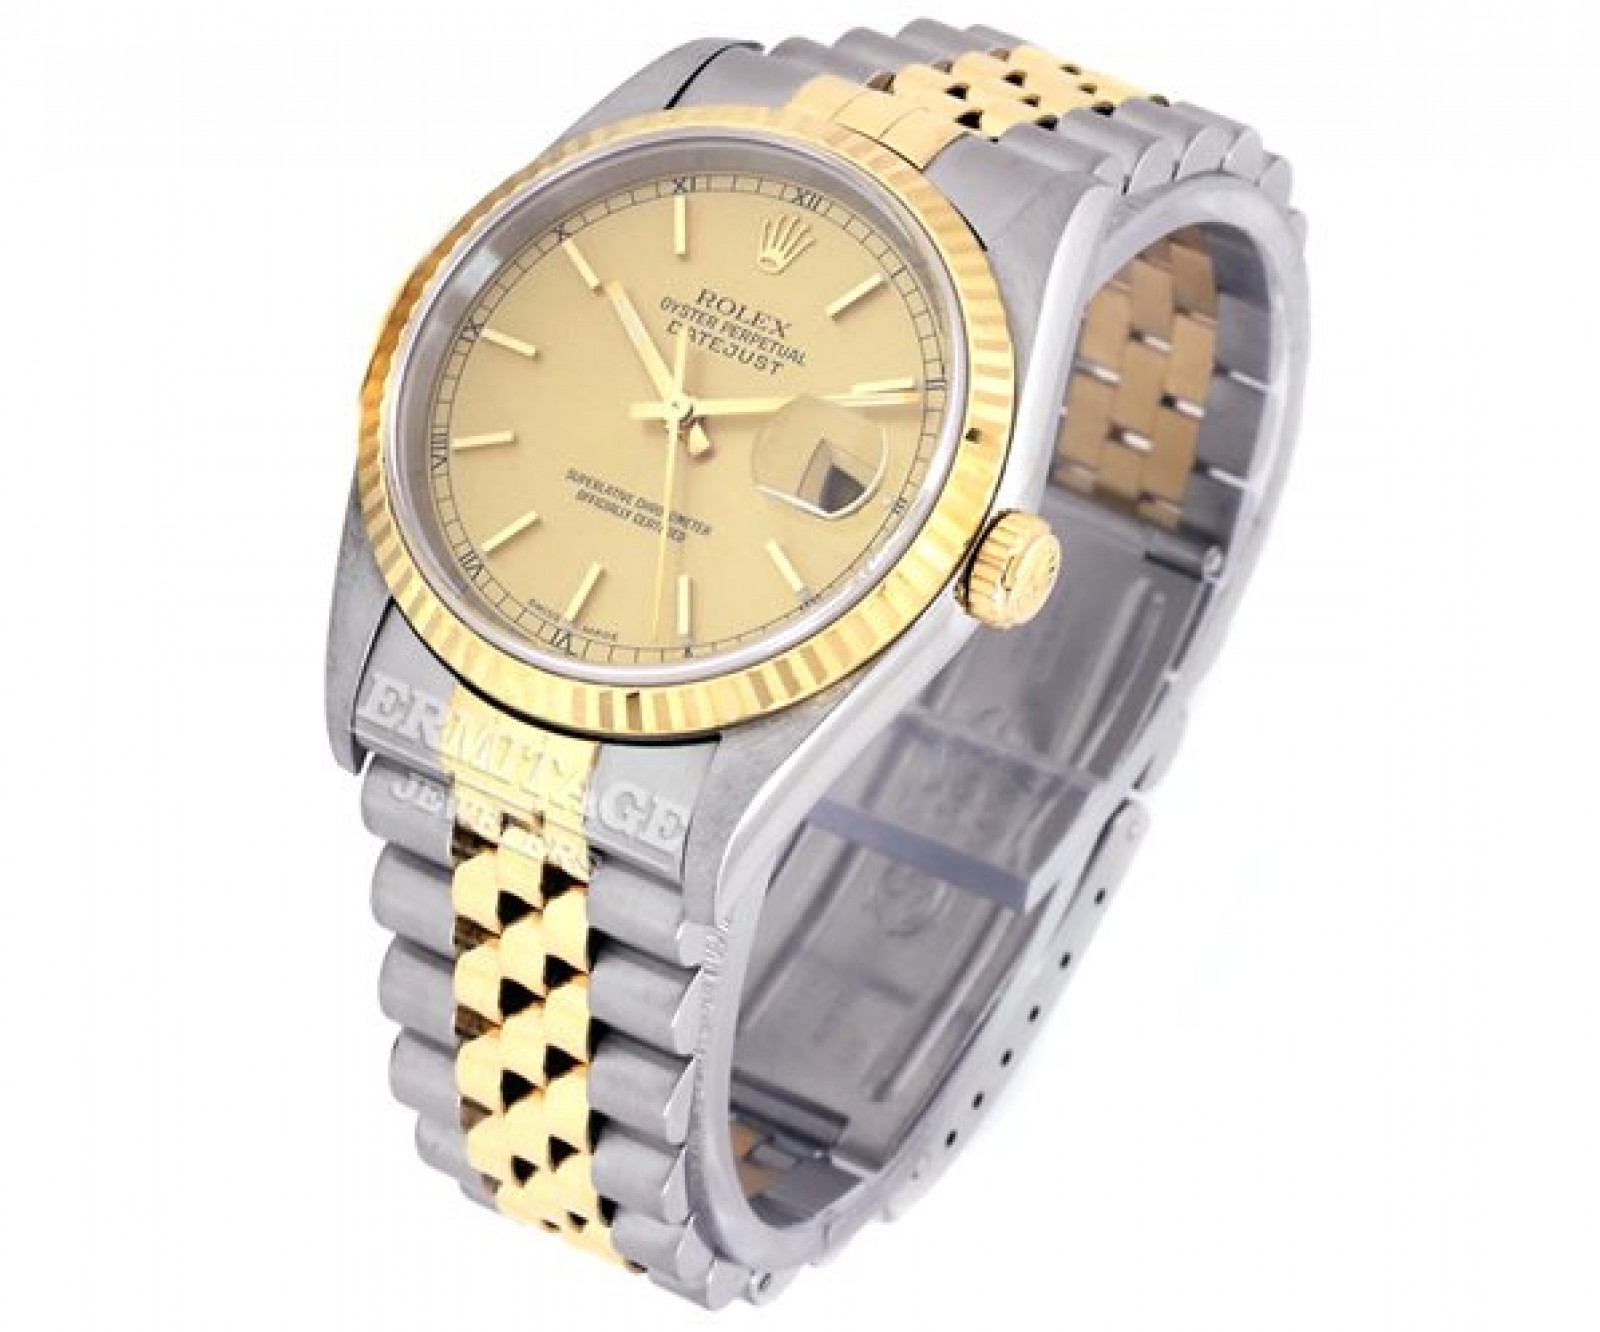 Rolex Oyster Perpetual Datejust 16233 Gold & Steel